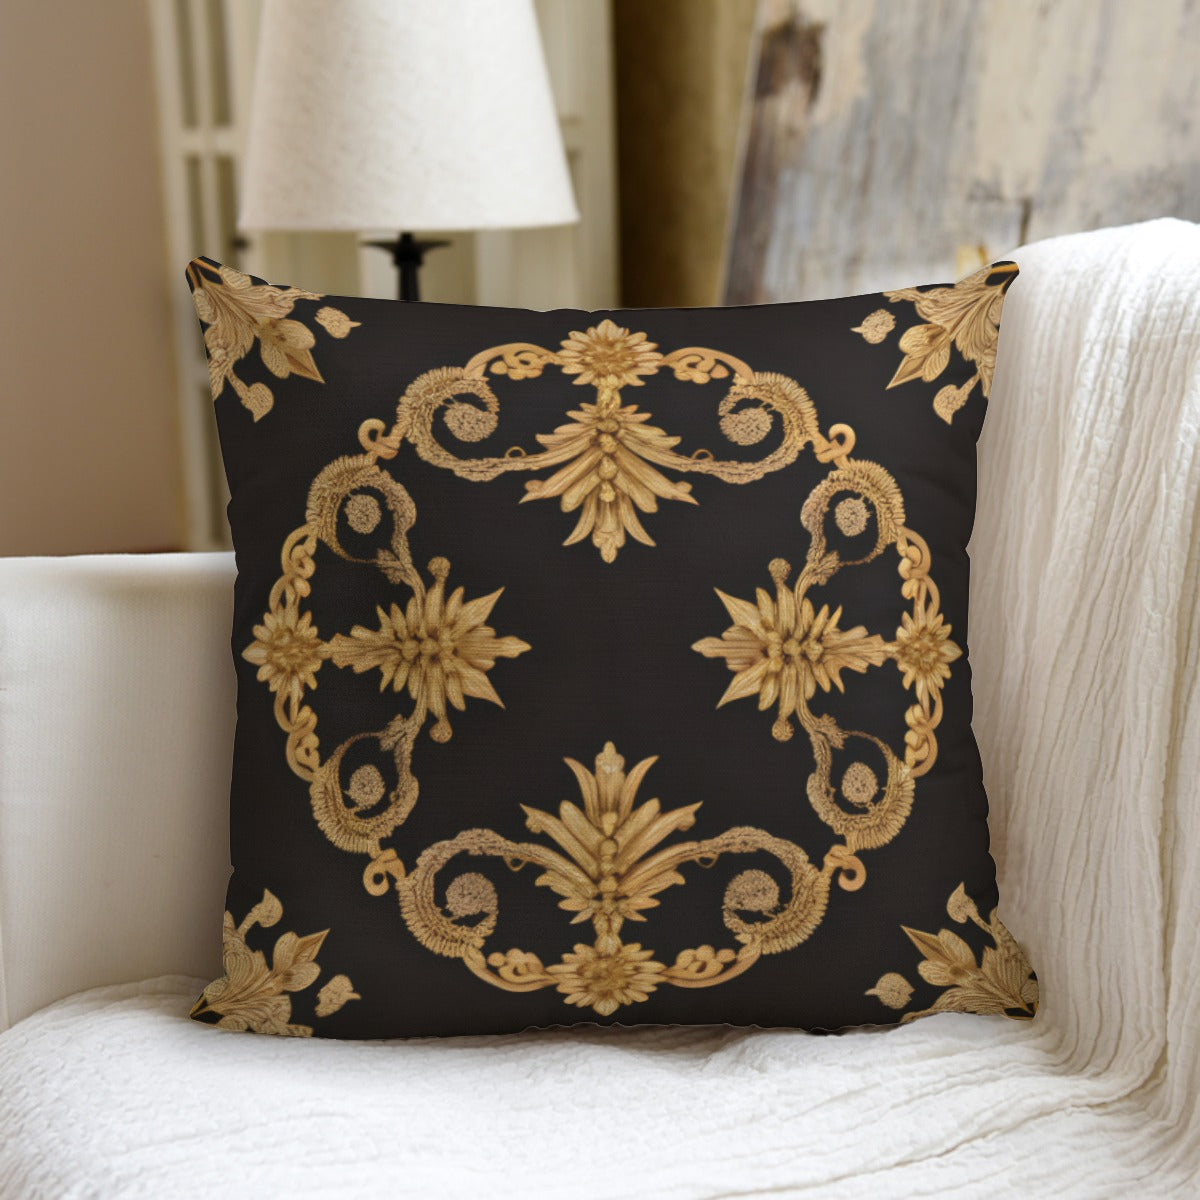 AC BAROQUE All-Over Print couch pillow with pillow Inserts